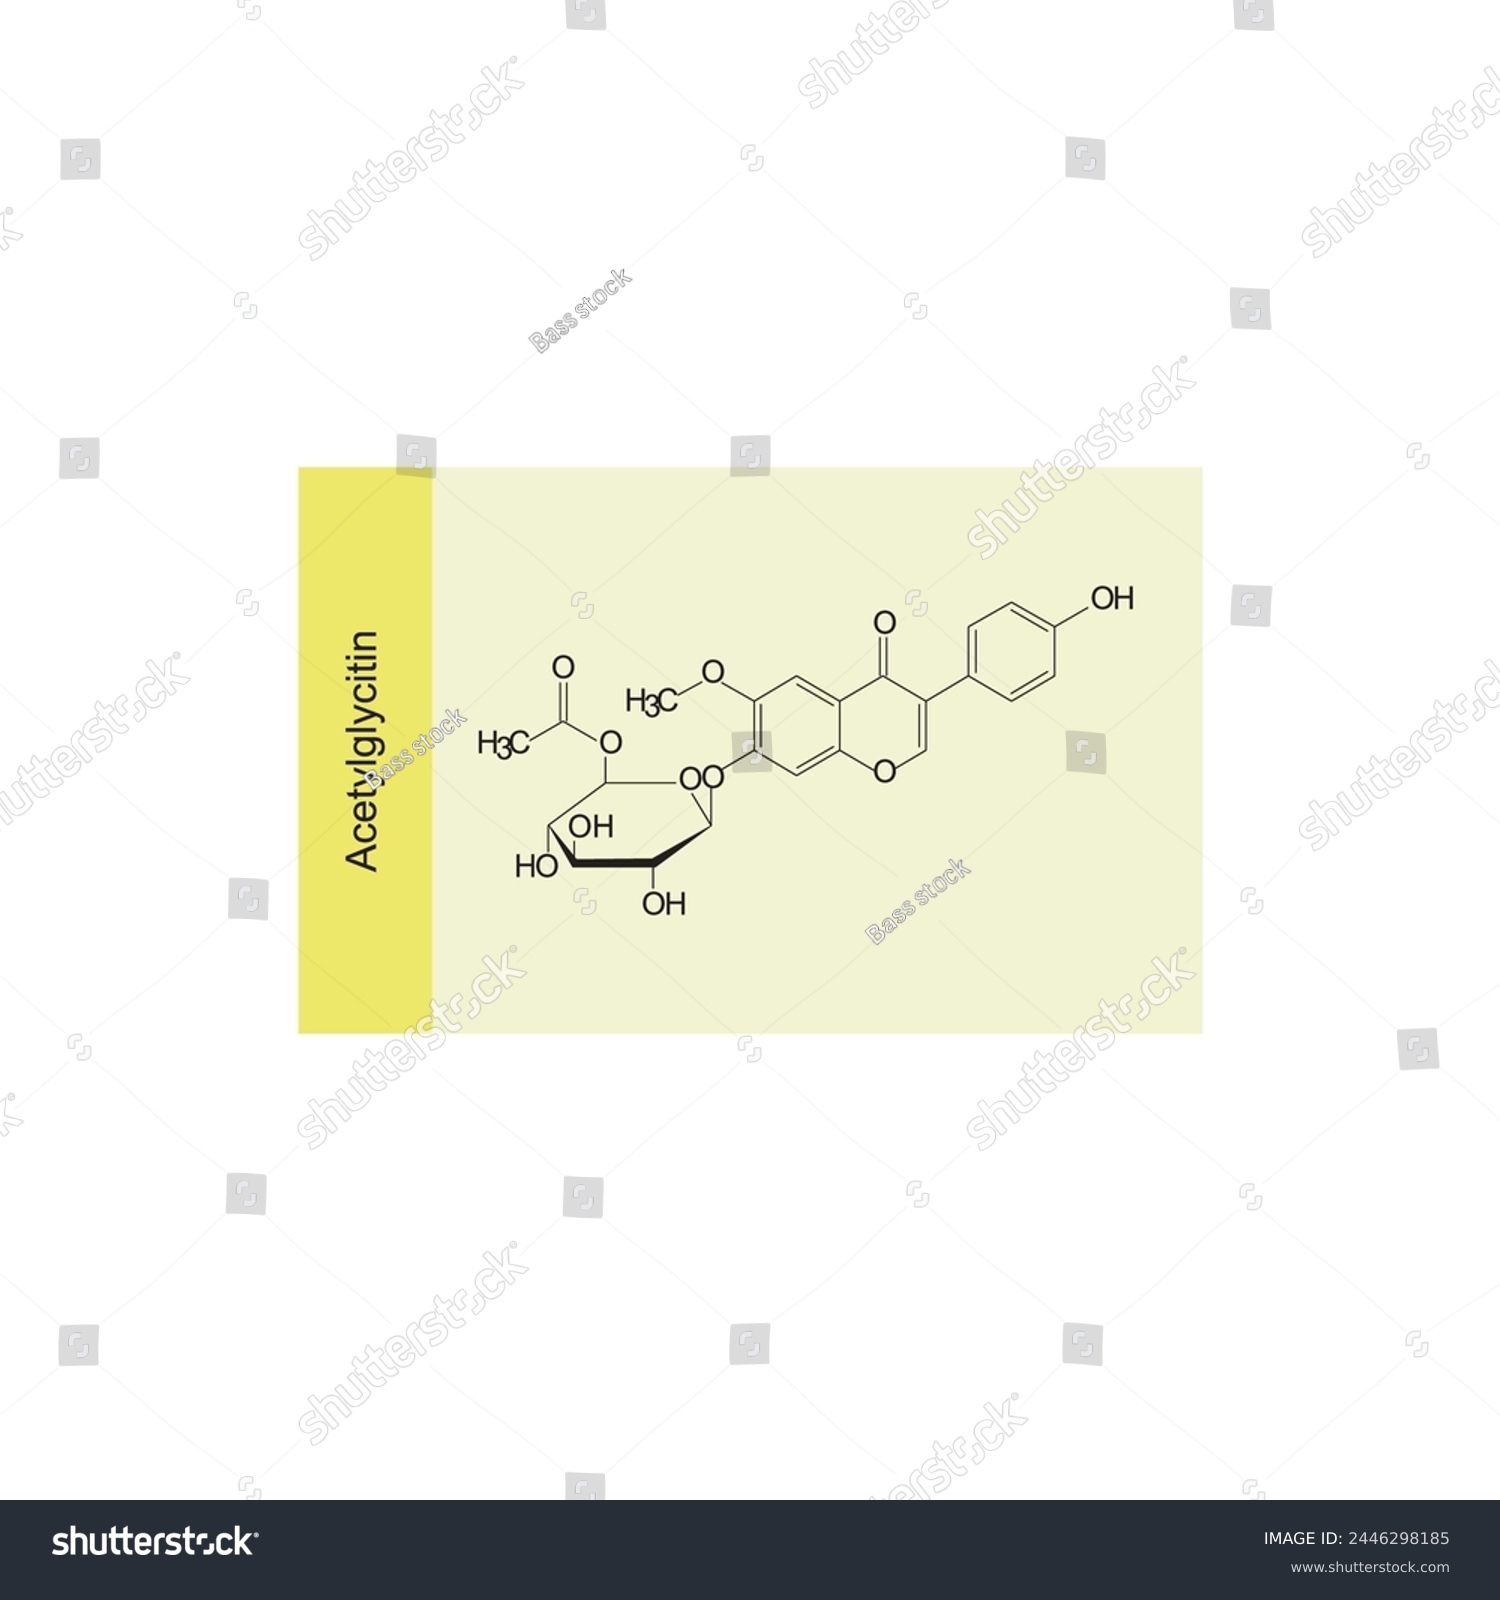 SVG of Acetylglycitin skeletal structure diagram.Isoflavanone compound molecule scientific illustration on yellow background. svg